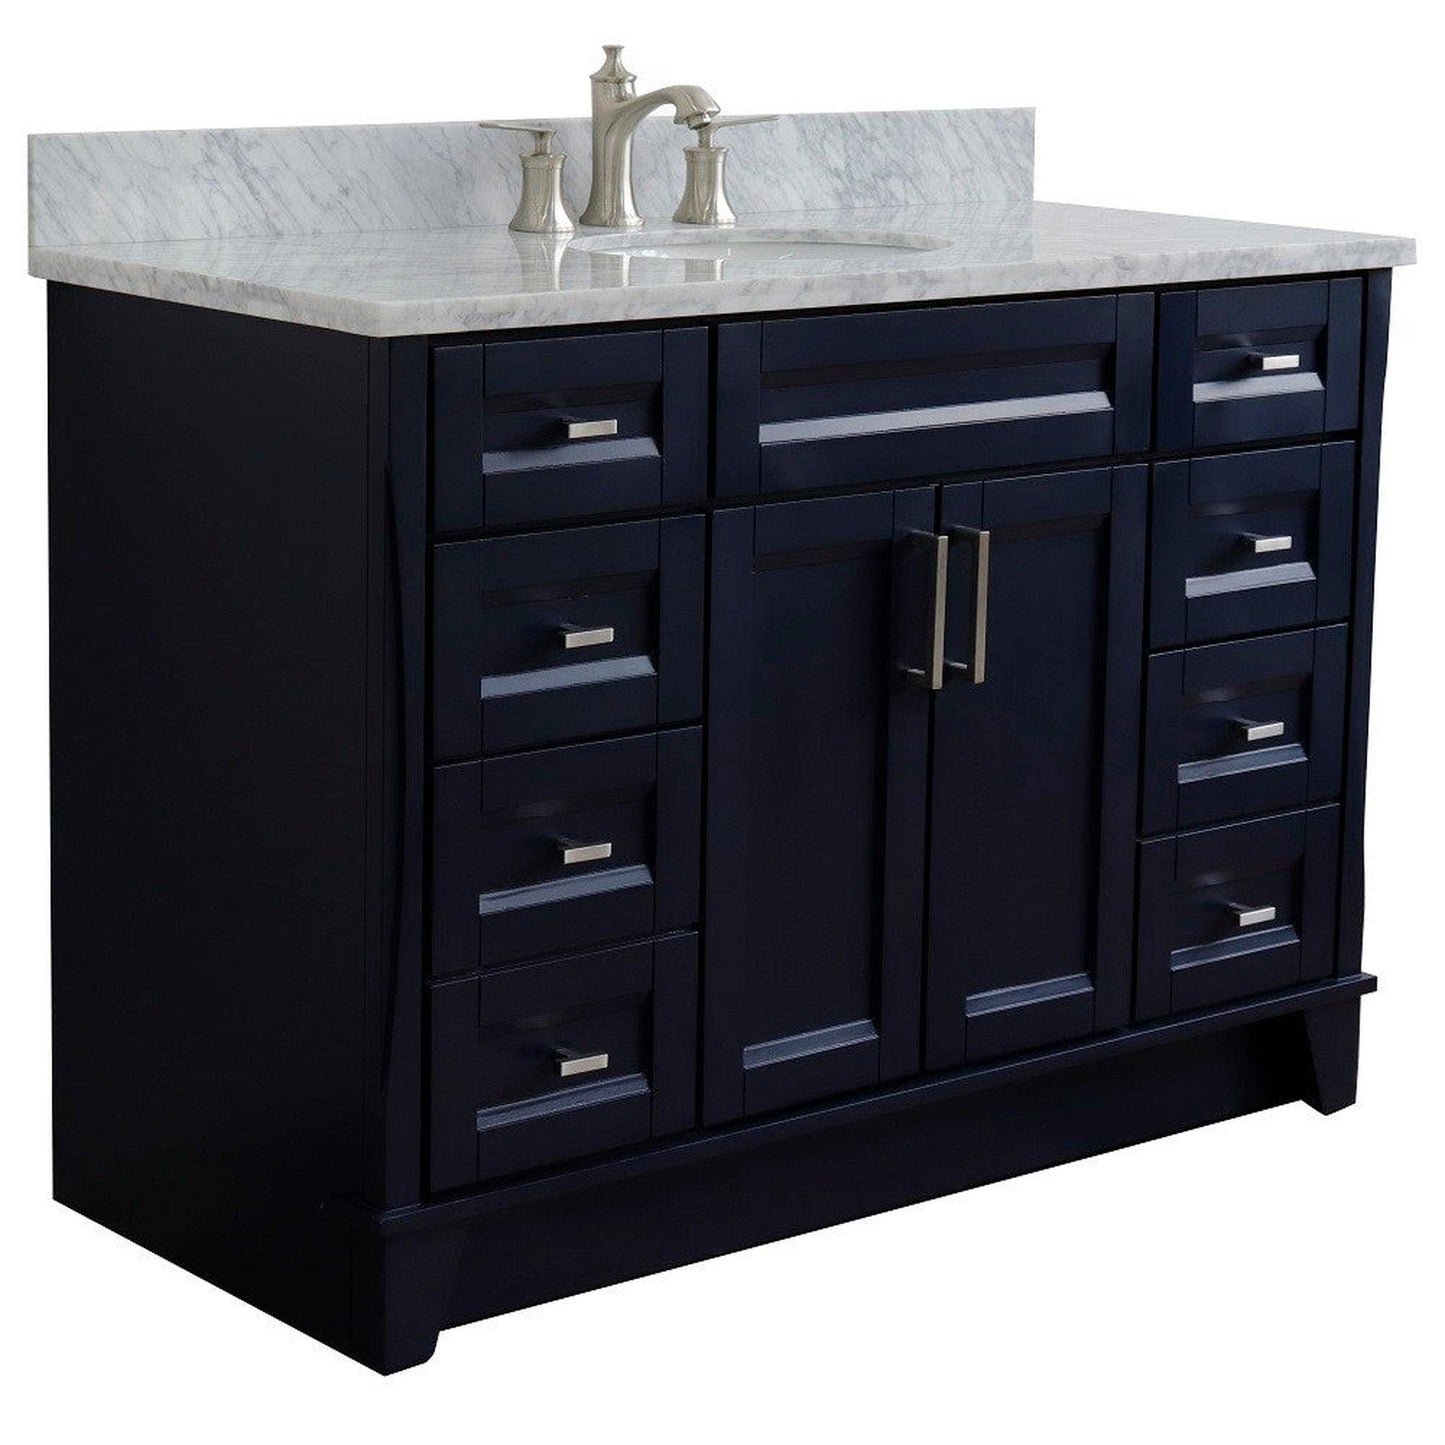 Bellaterra Home Terni 49" 2-Door 6-Drawer Blue Freestanding Vanity Set With Ceramic Undermount Oval Sink and White Carrara Marble Top